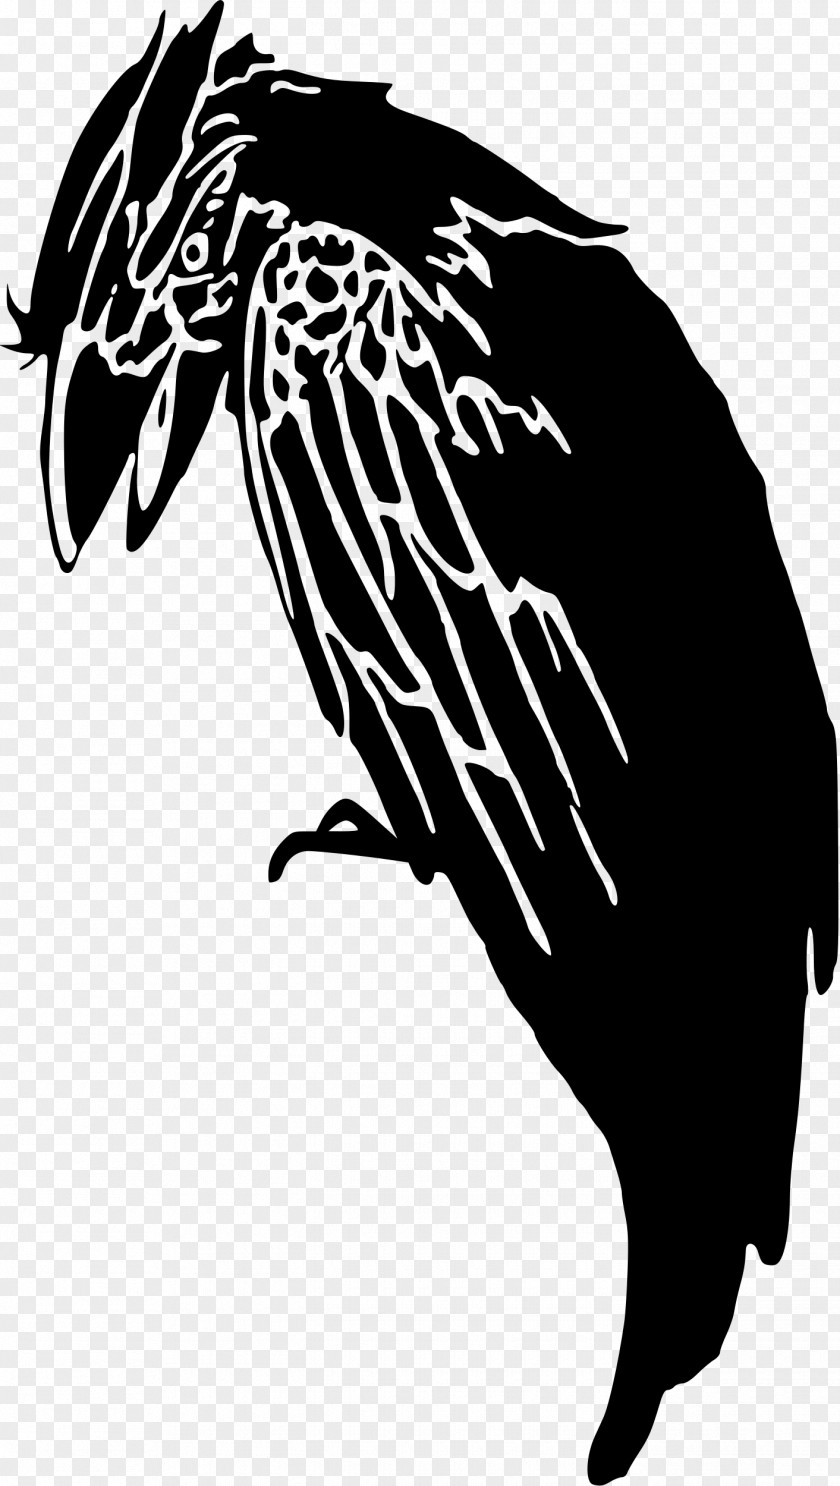 Silhouette Crow Clip Art PNG